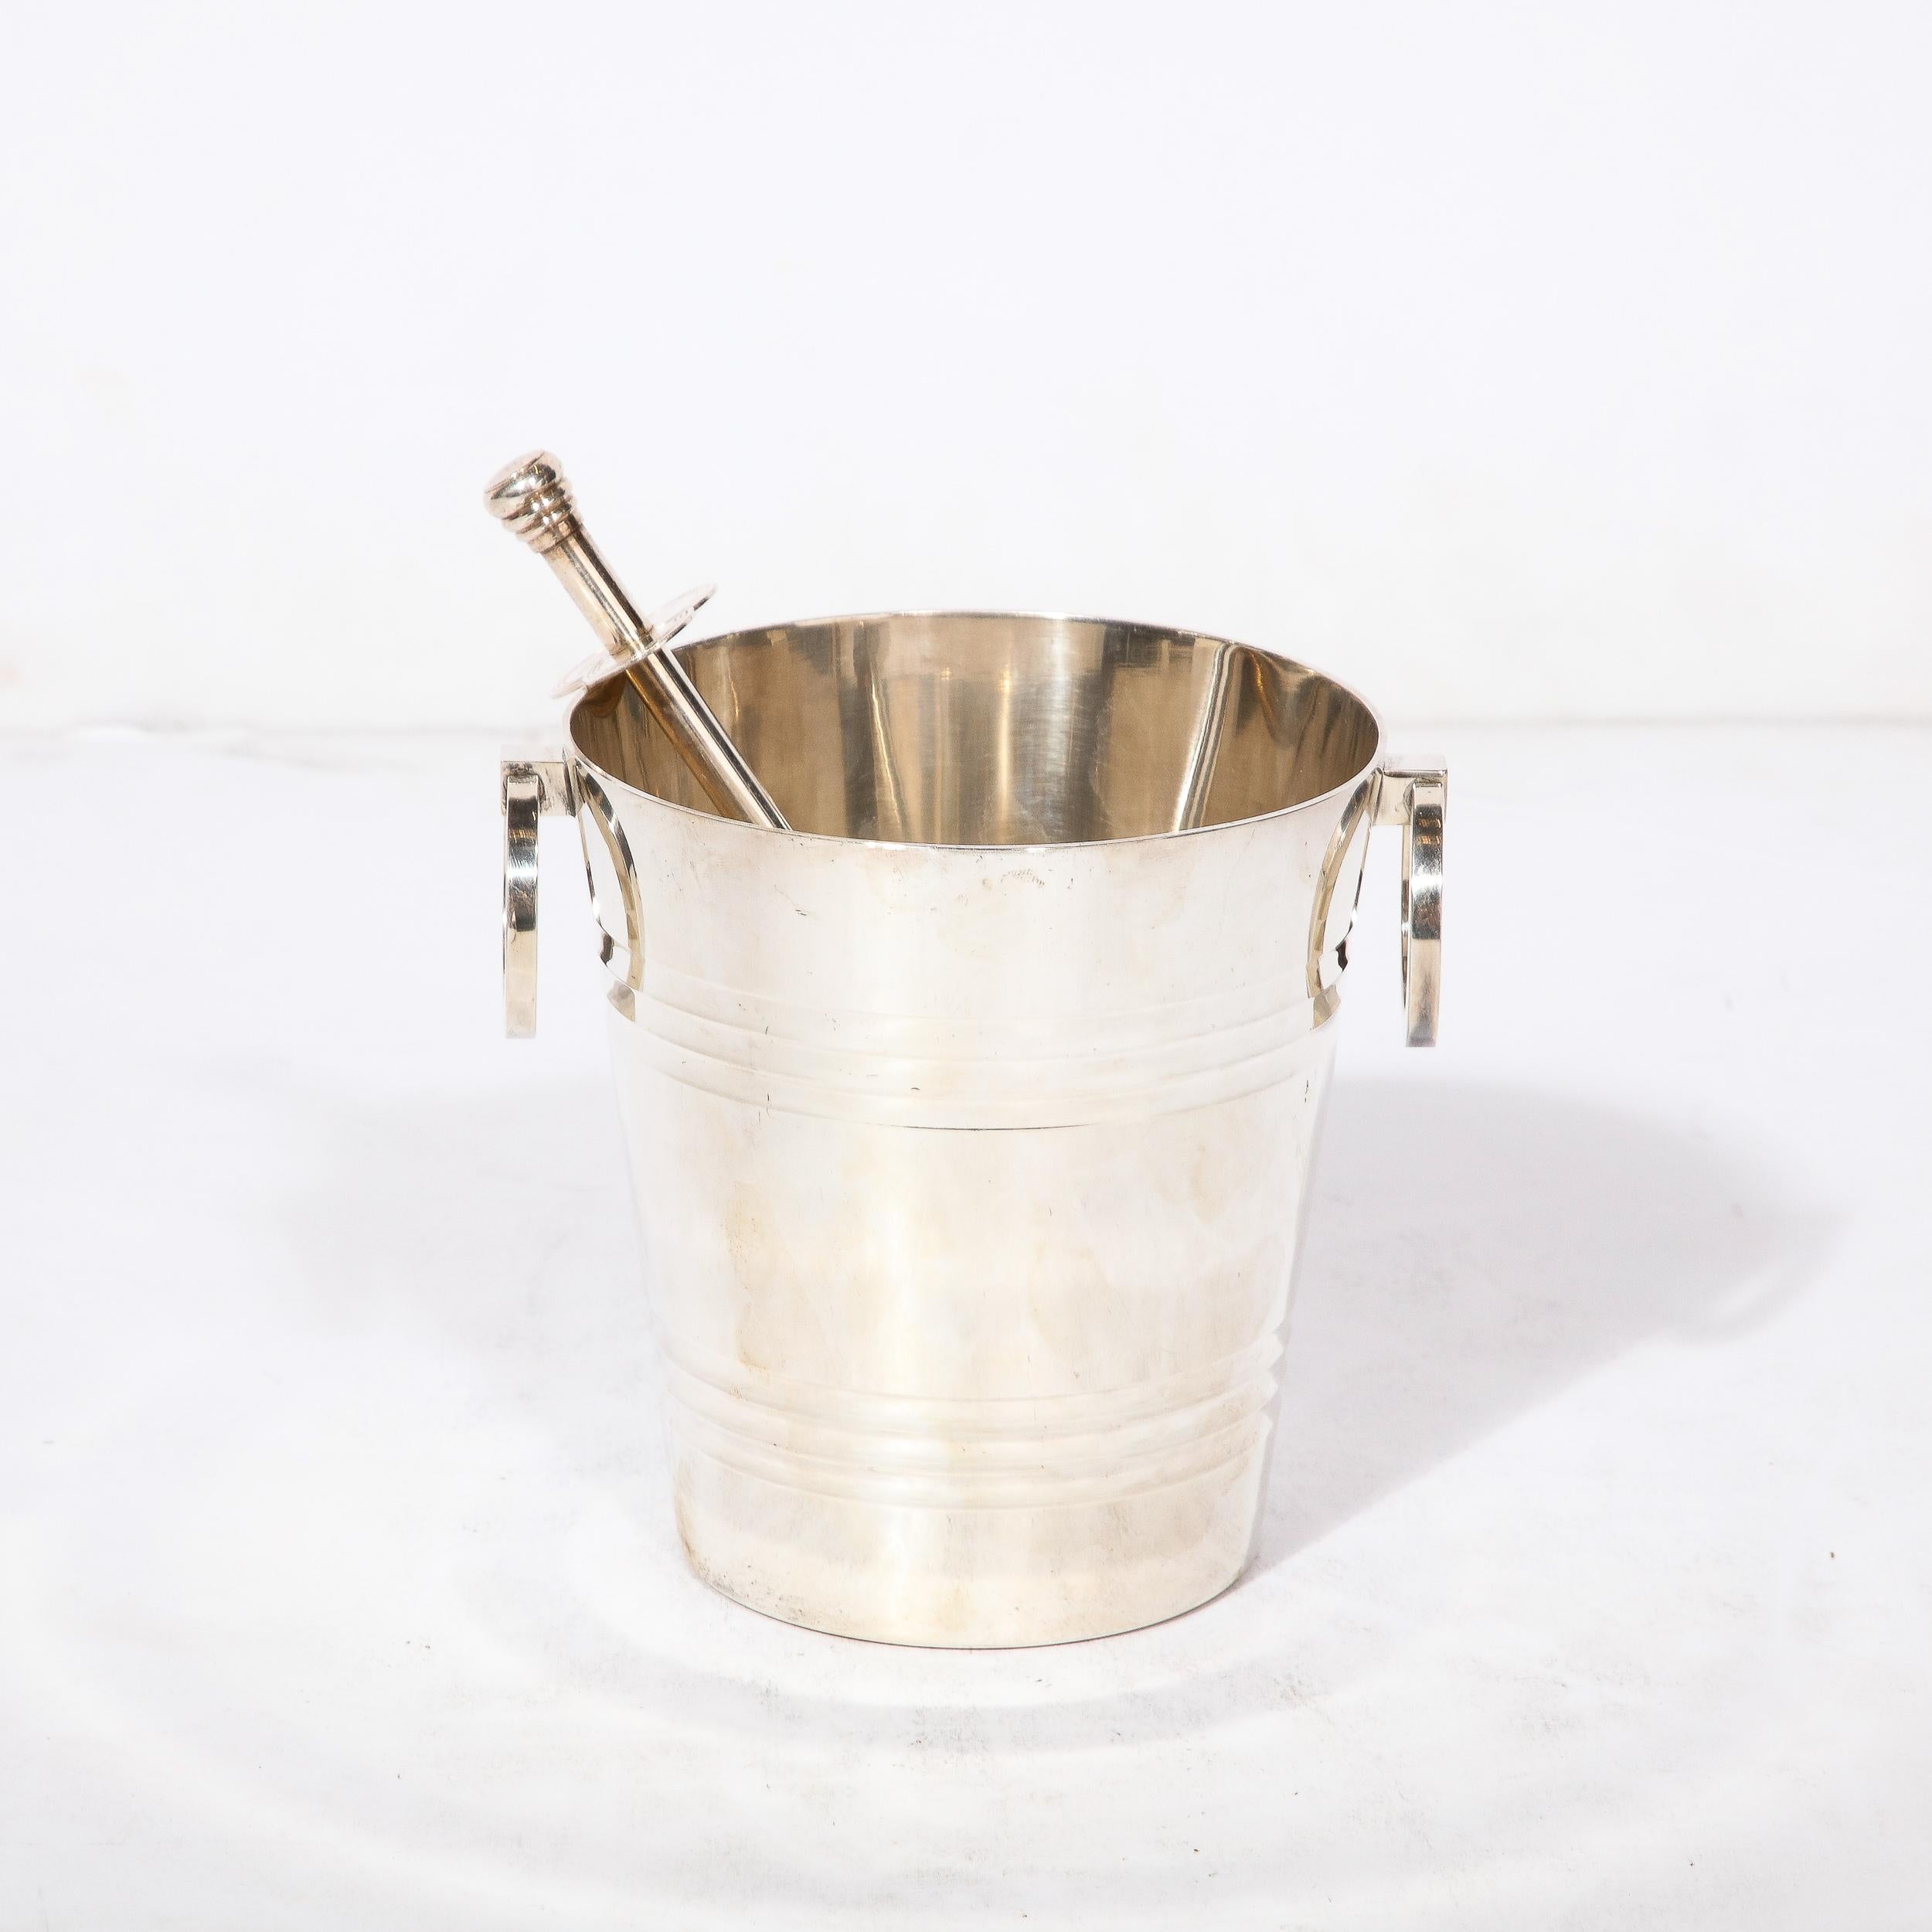 This Art deco  SilverPlate  Ice Bucket originates from France, Circa 1940. Featuring beautiful streamlined detailing throughout the design with moments of radiating spaced grooves on the body of the piece, the handles are geometric and minimal rings